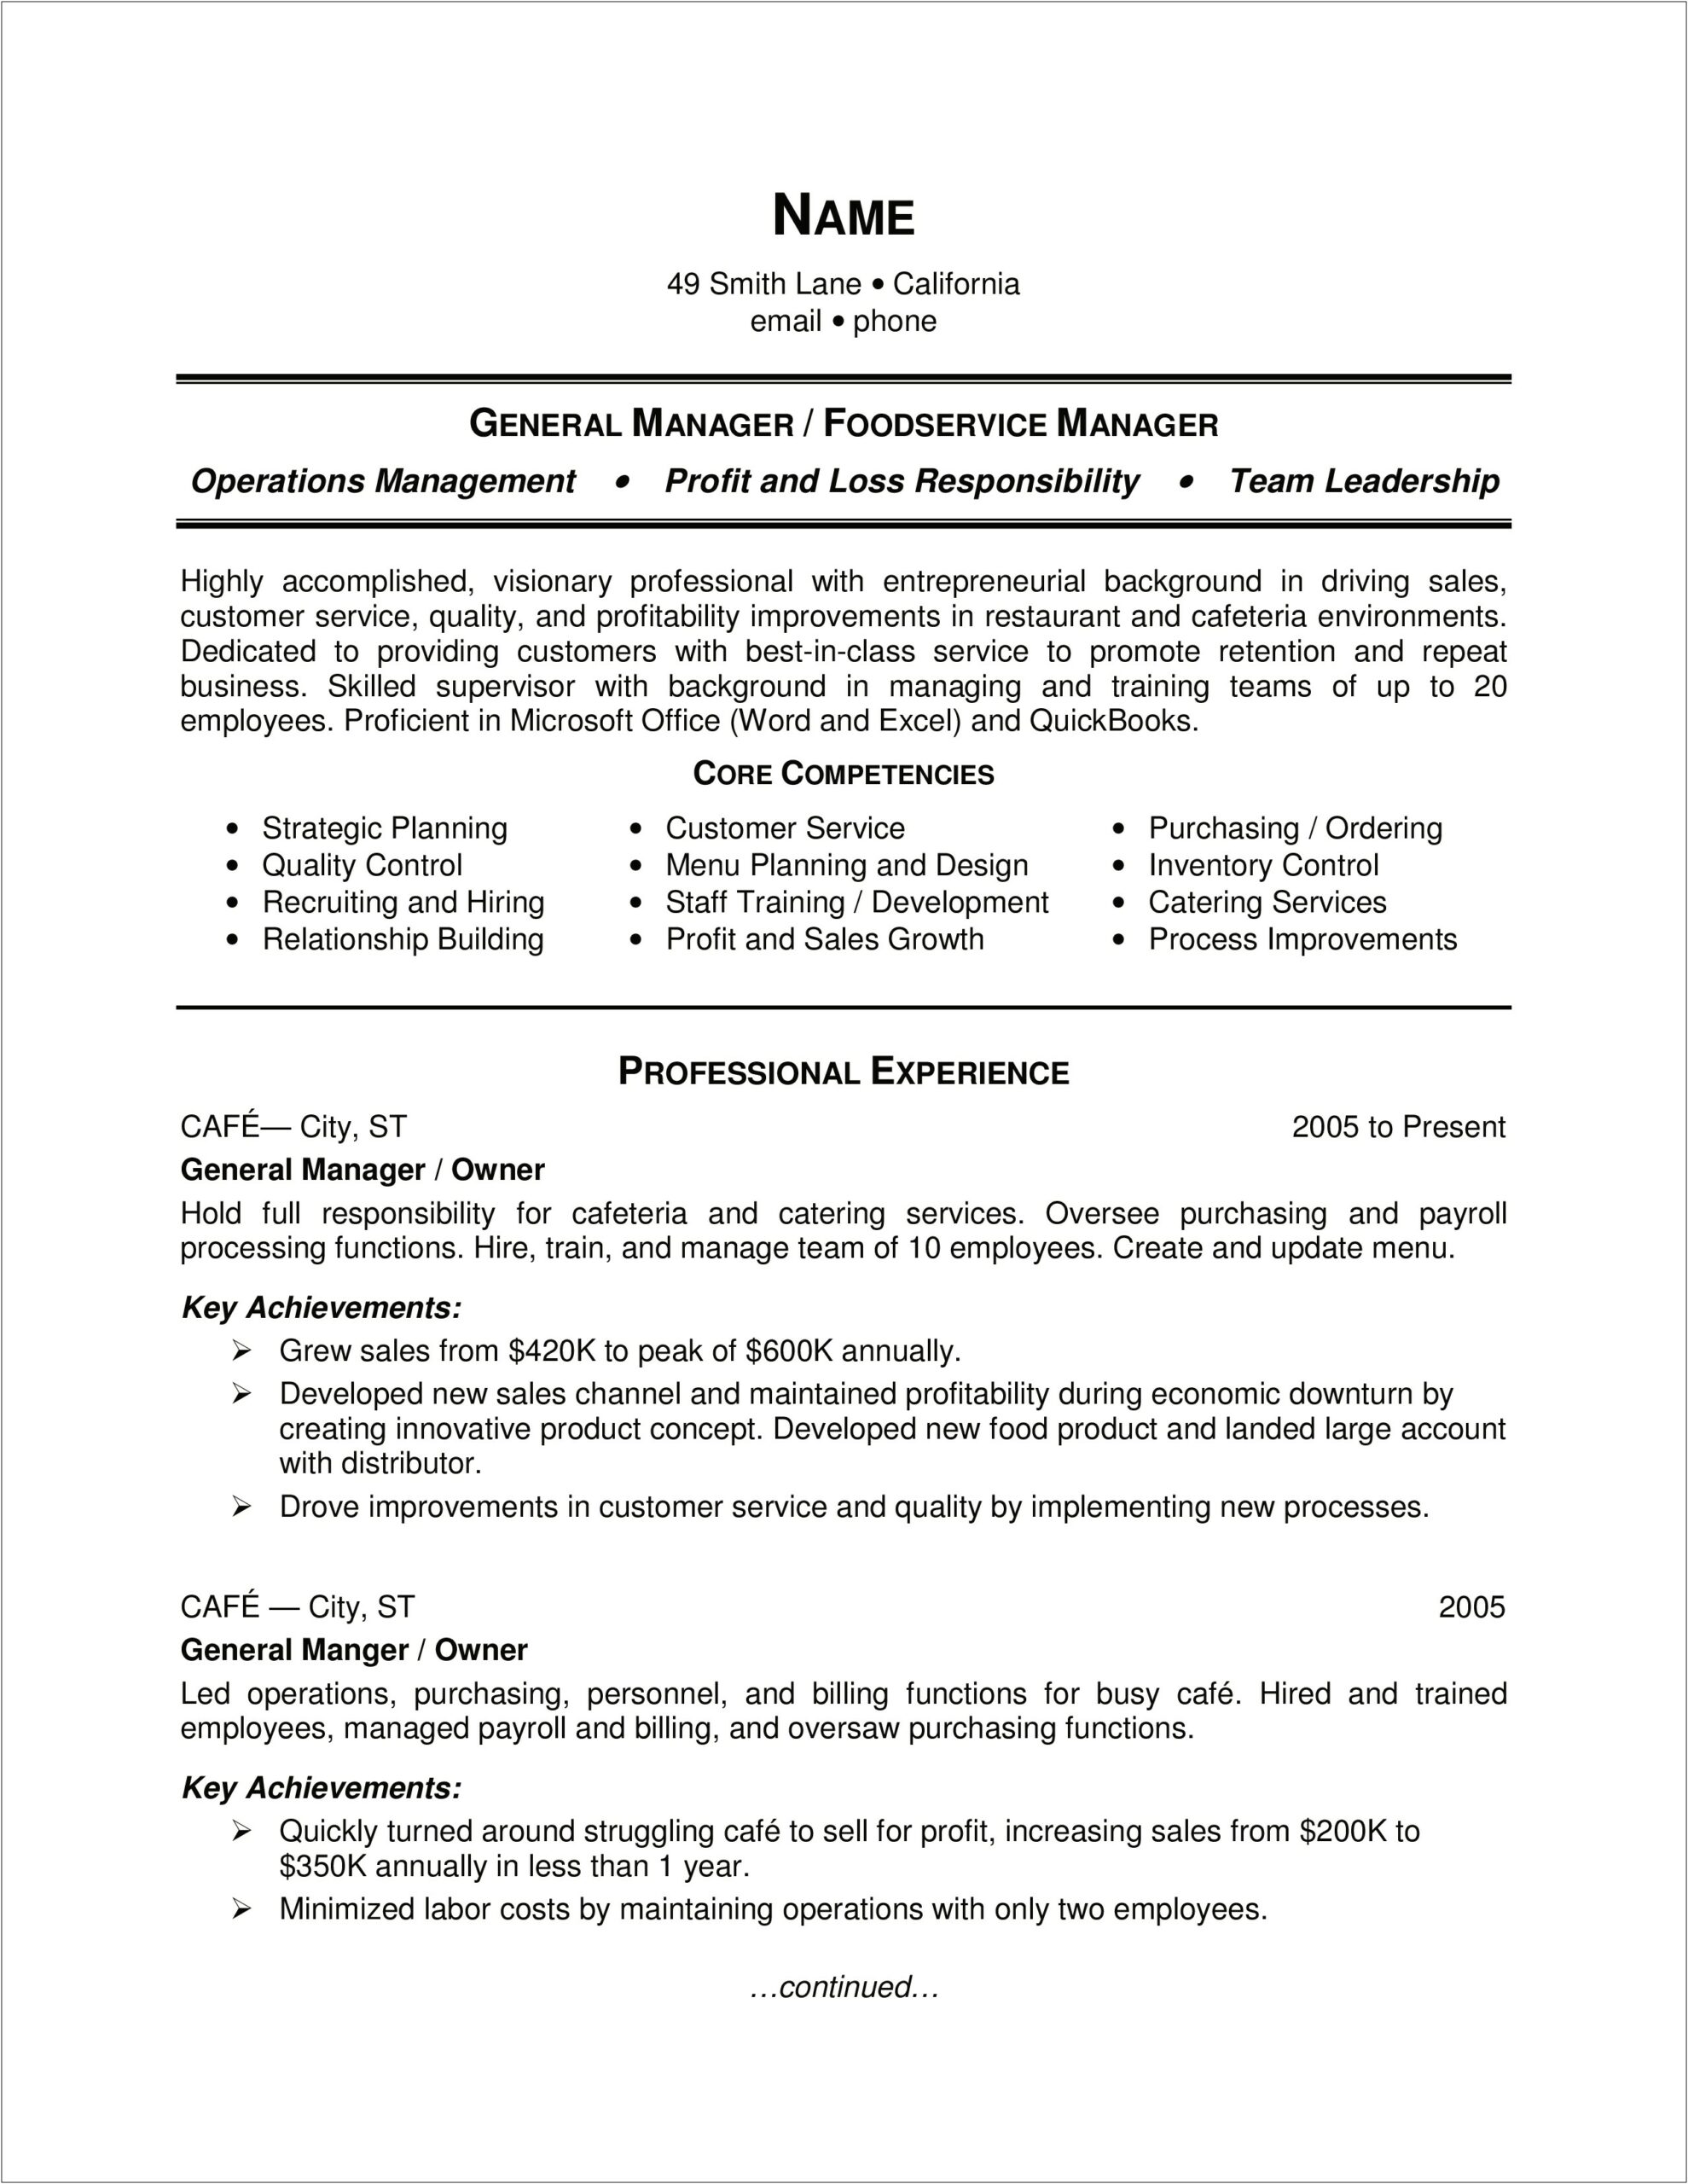 Resume Examples For General Managers